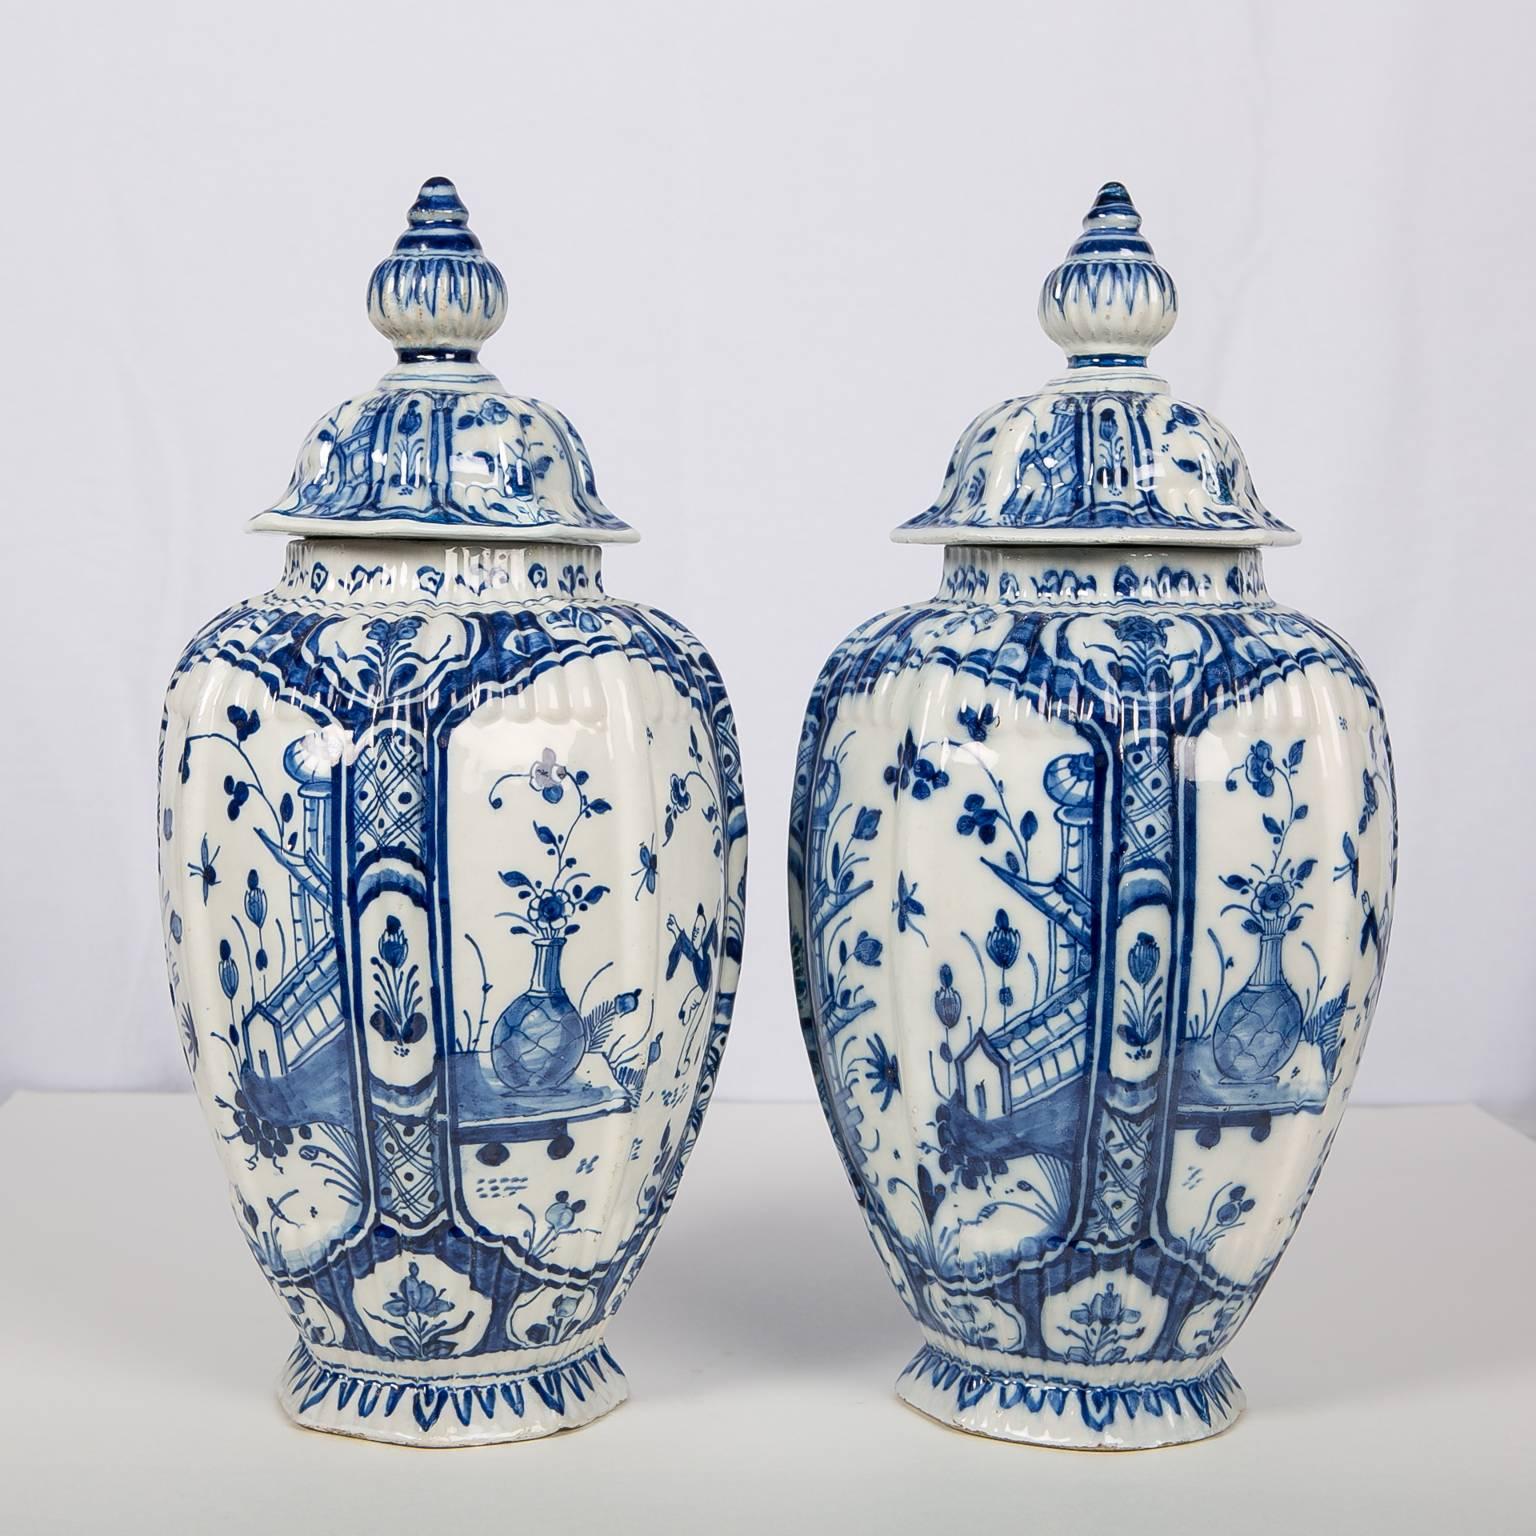 Chinoiserie Pair of Delft Jars Blue and White, 18th Century